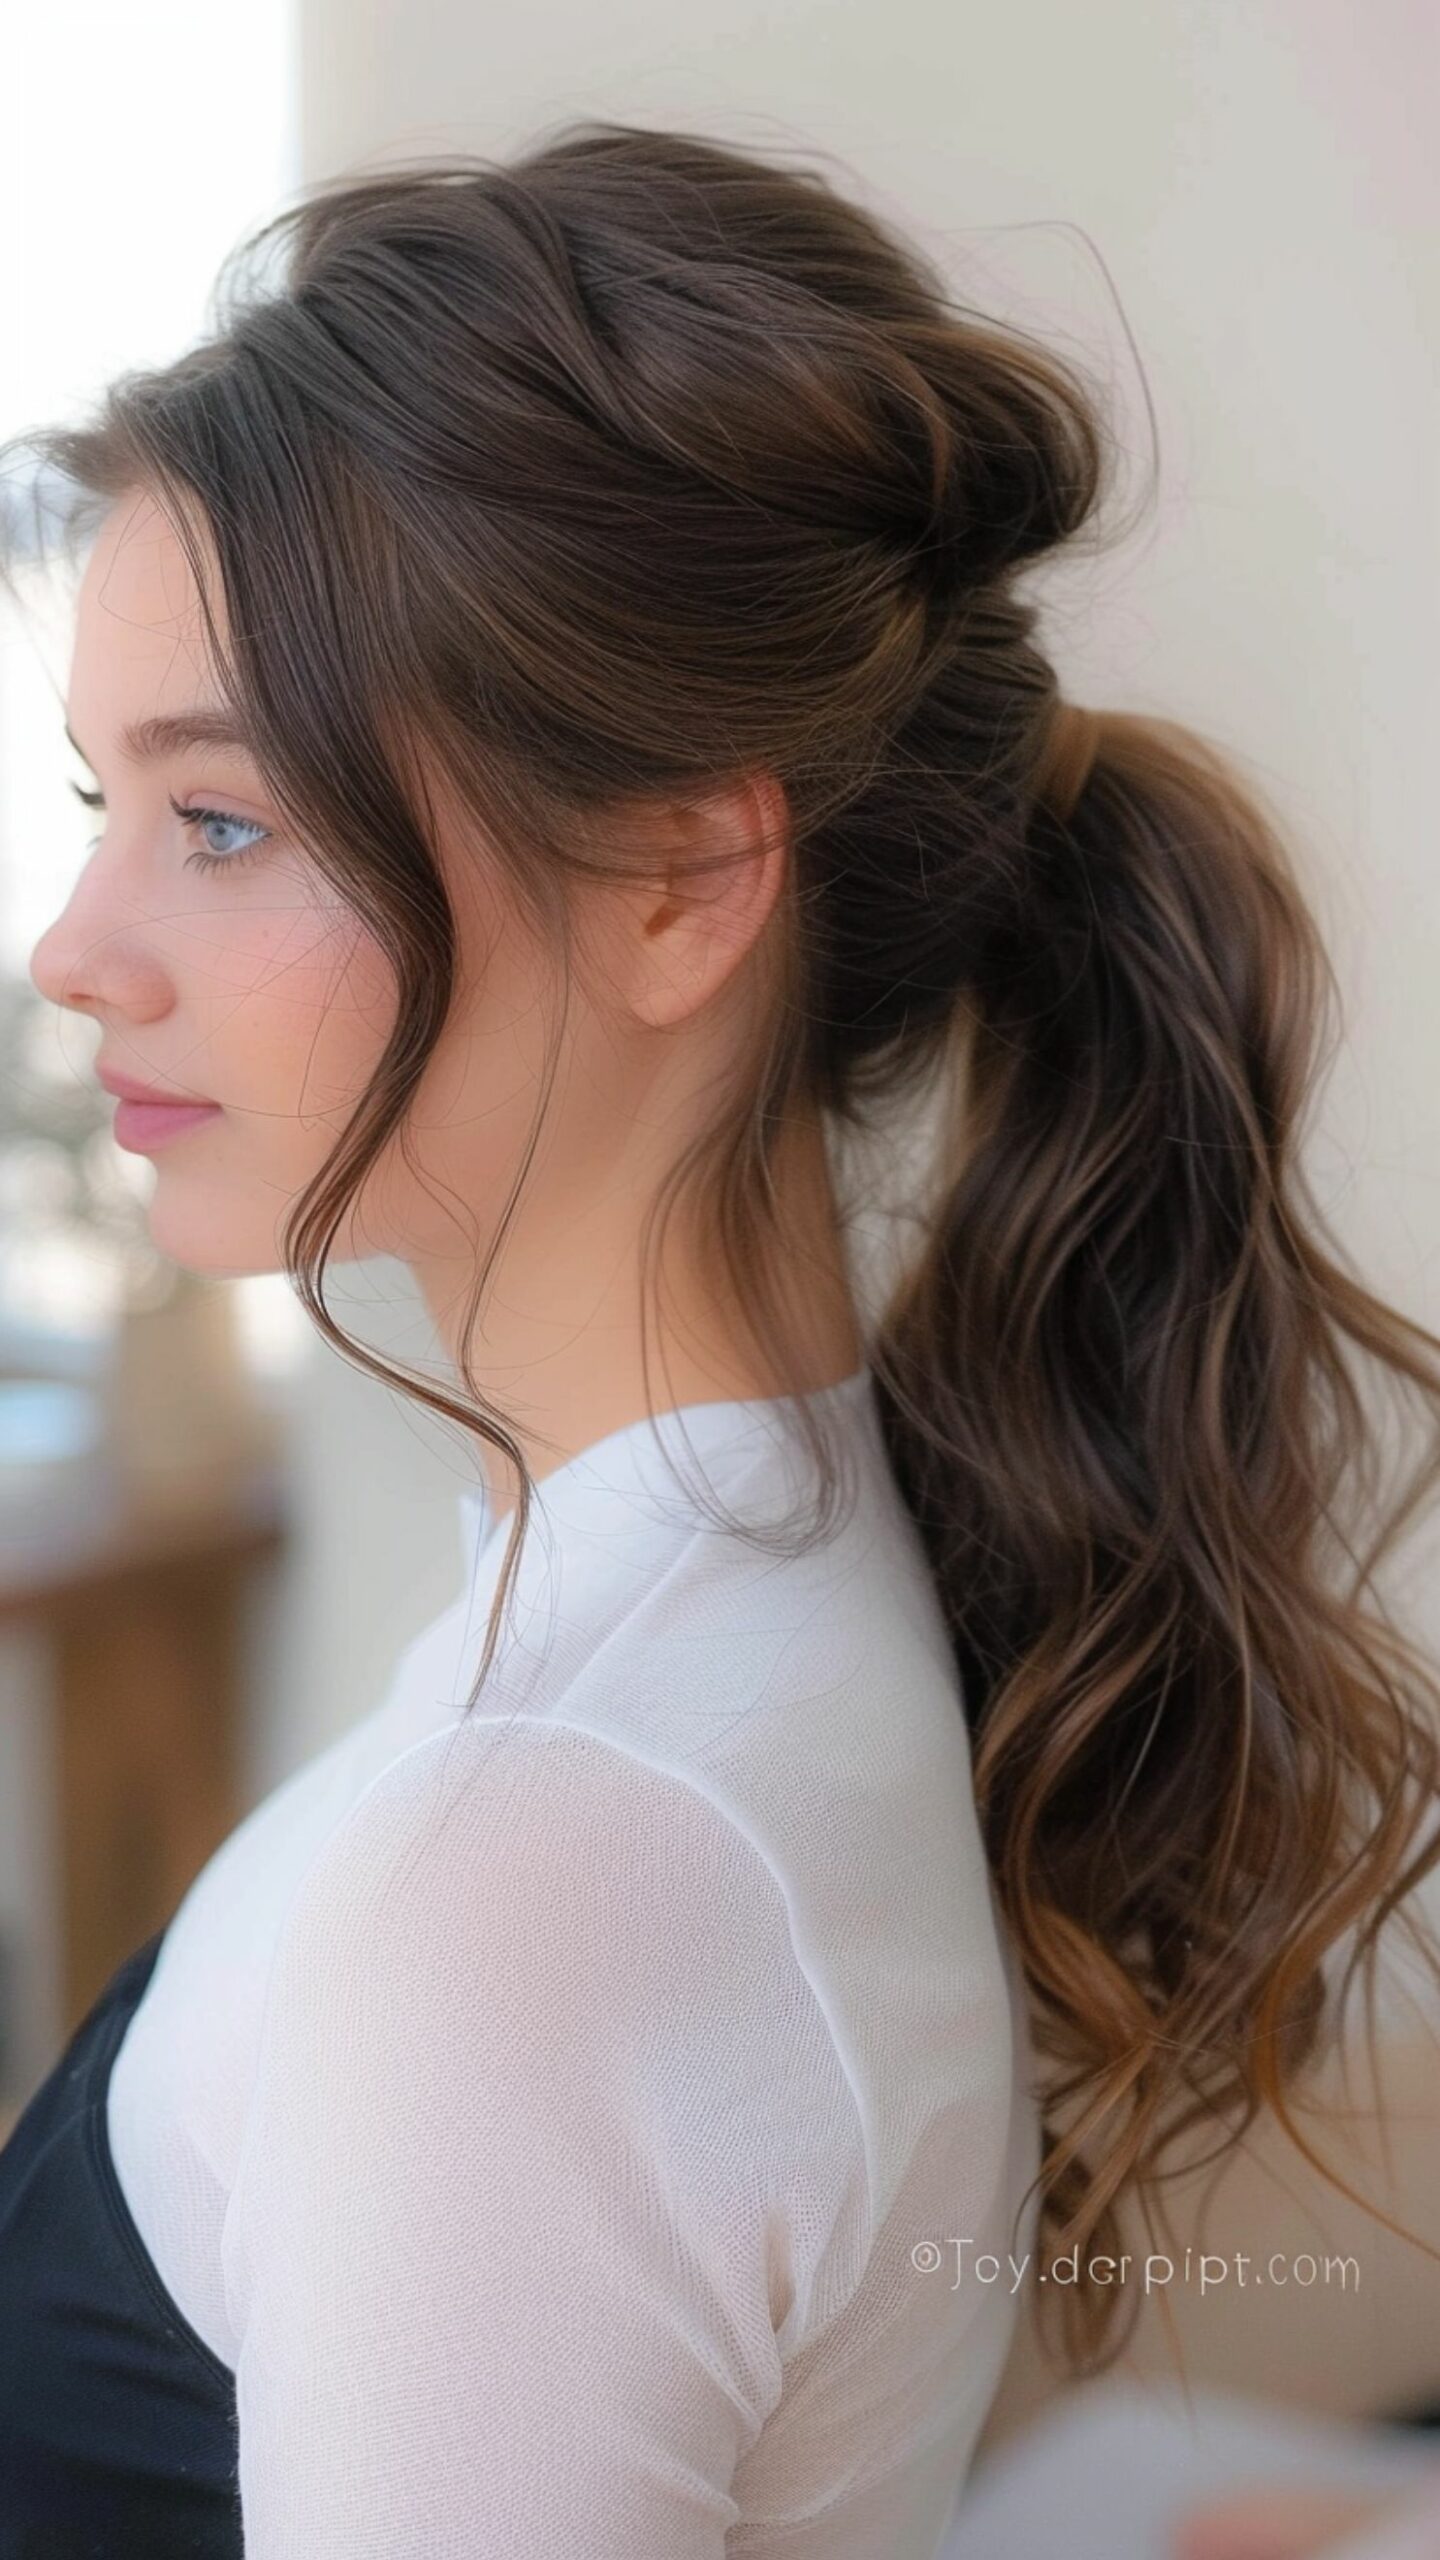 A woman modelling a ponytail with soft waves hairstyle.